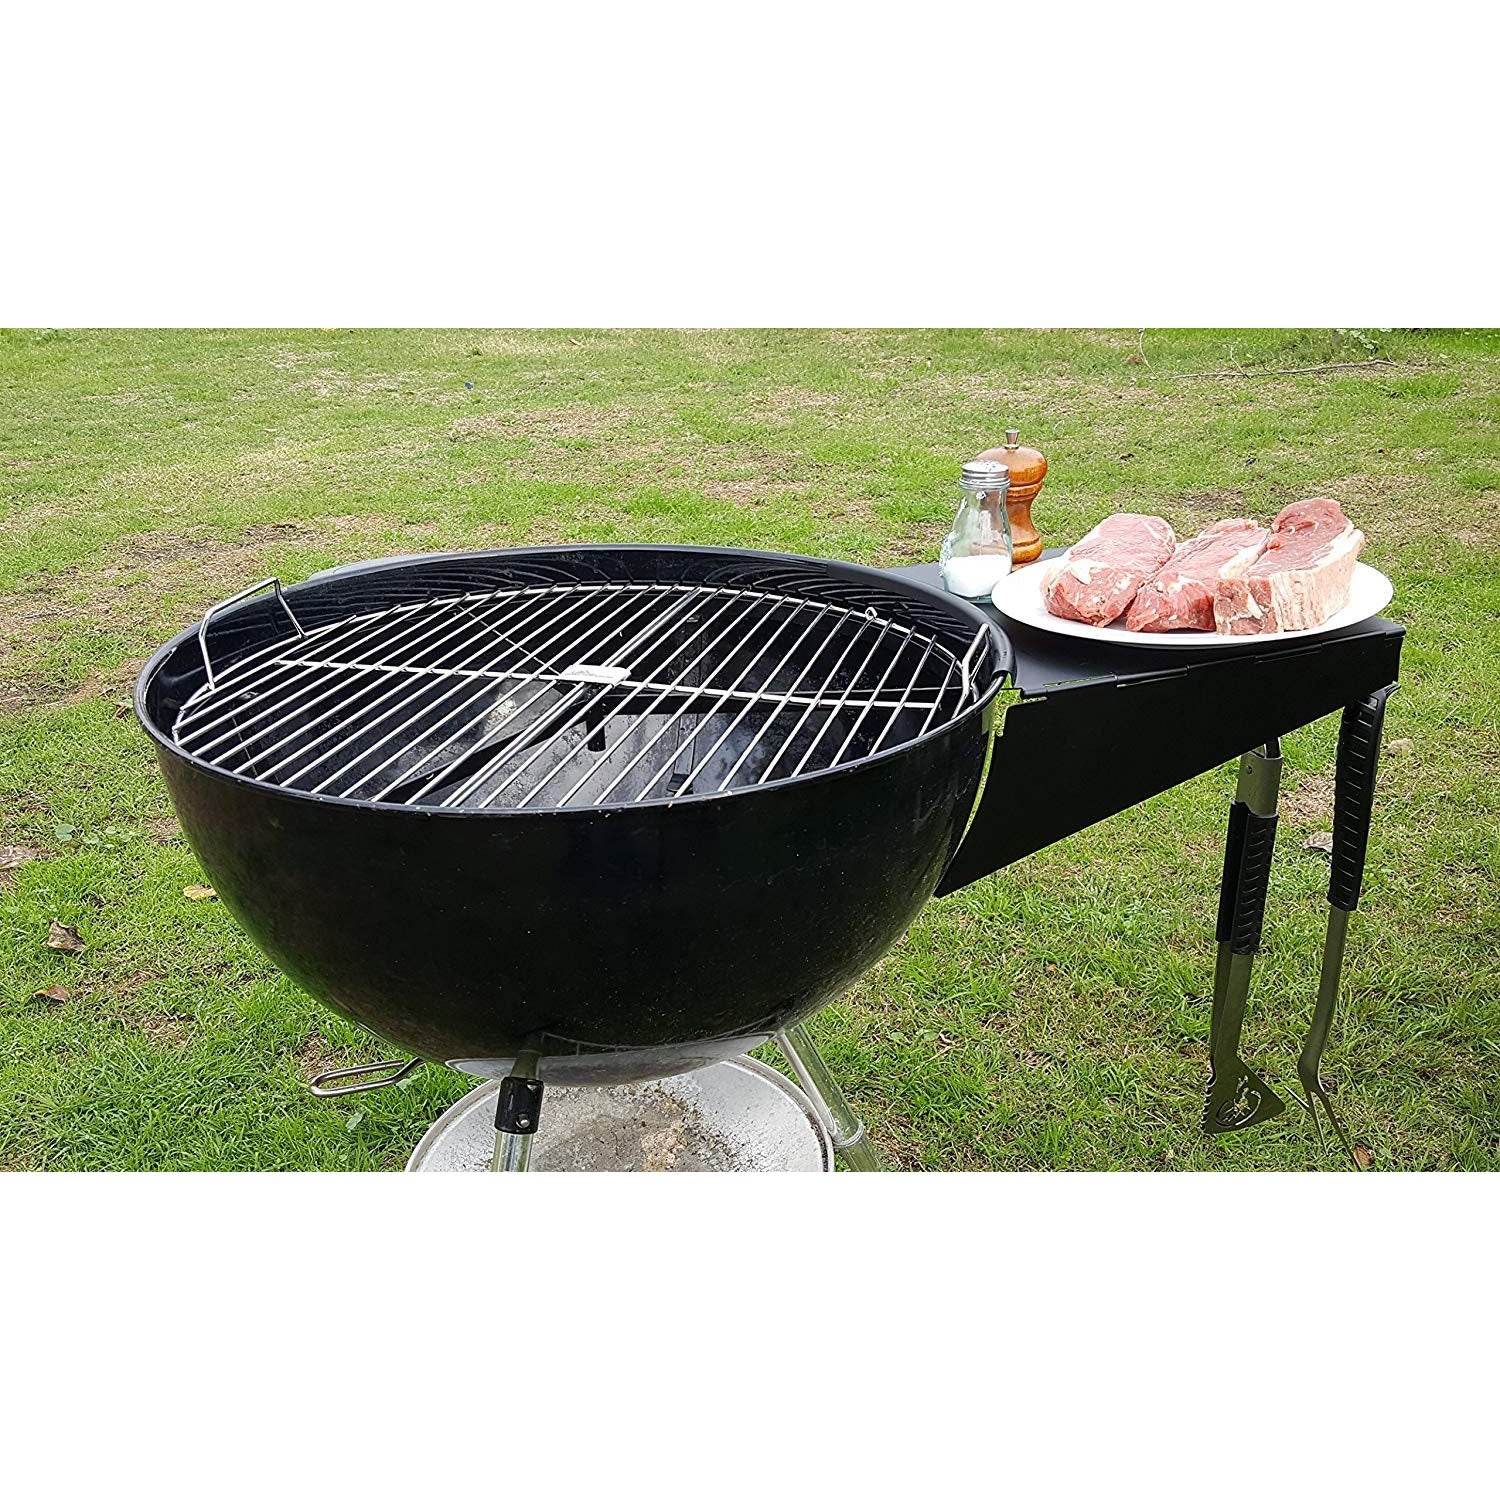 BBQ Dragon Grill Table Fits 22 Weber Charcoal Grills, Weber Grill Tab –  Persik brand